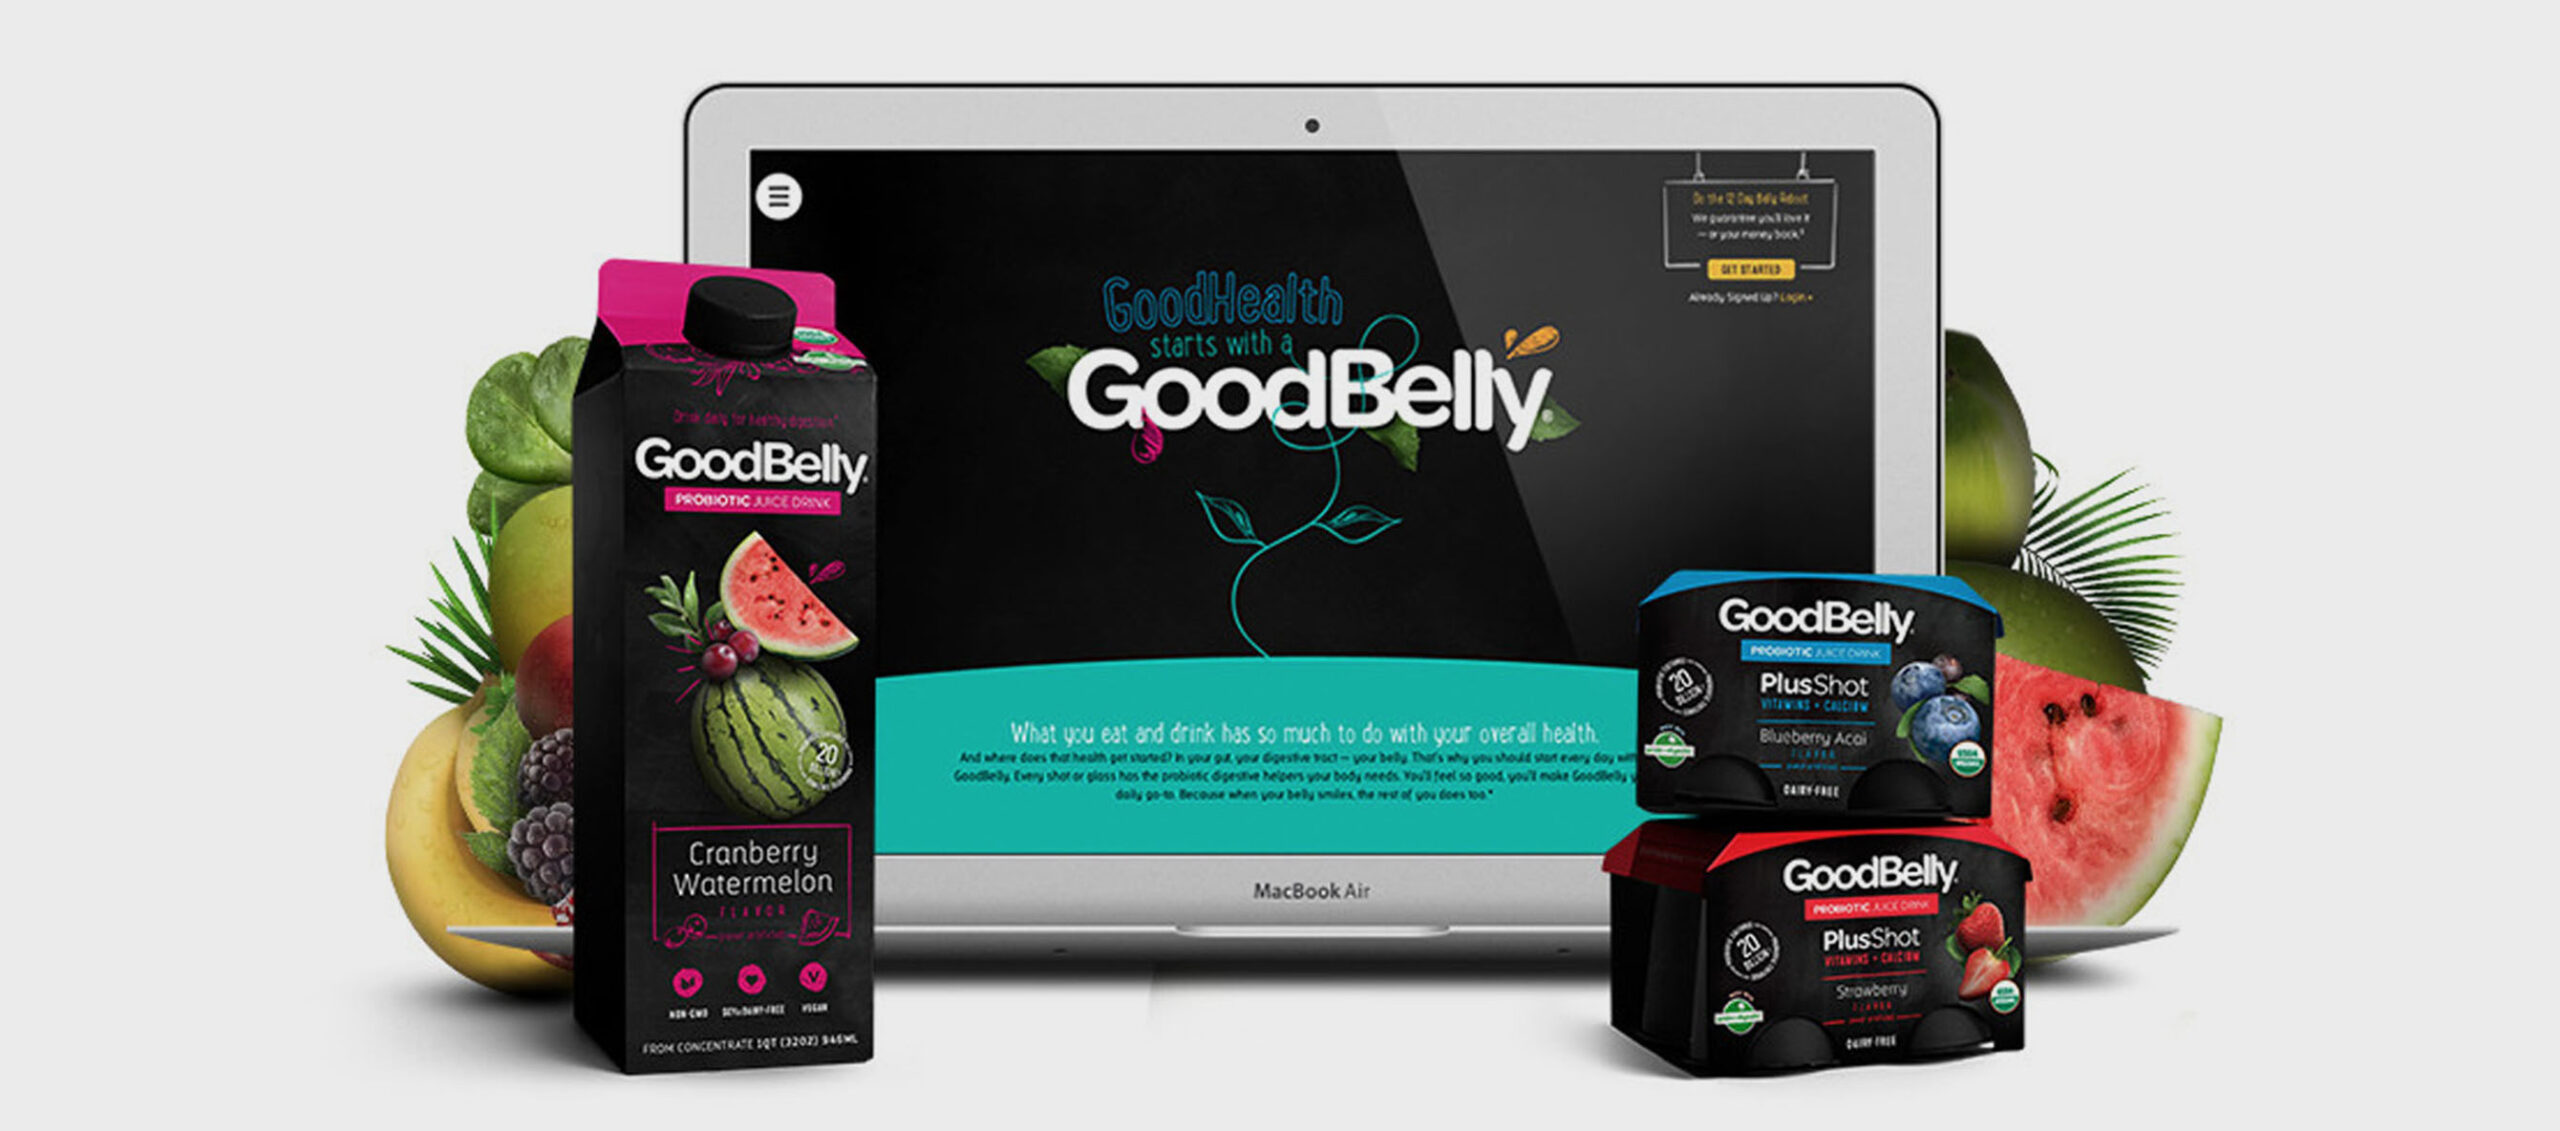 GoodBelly launches new probiotic product lines